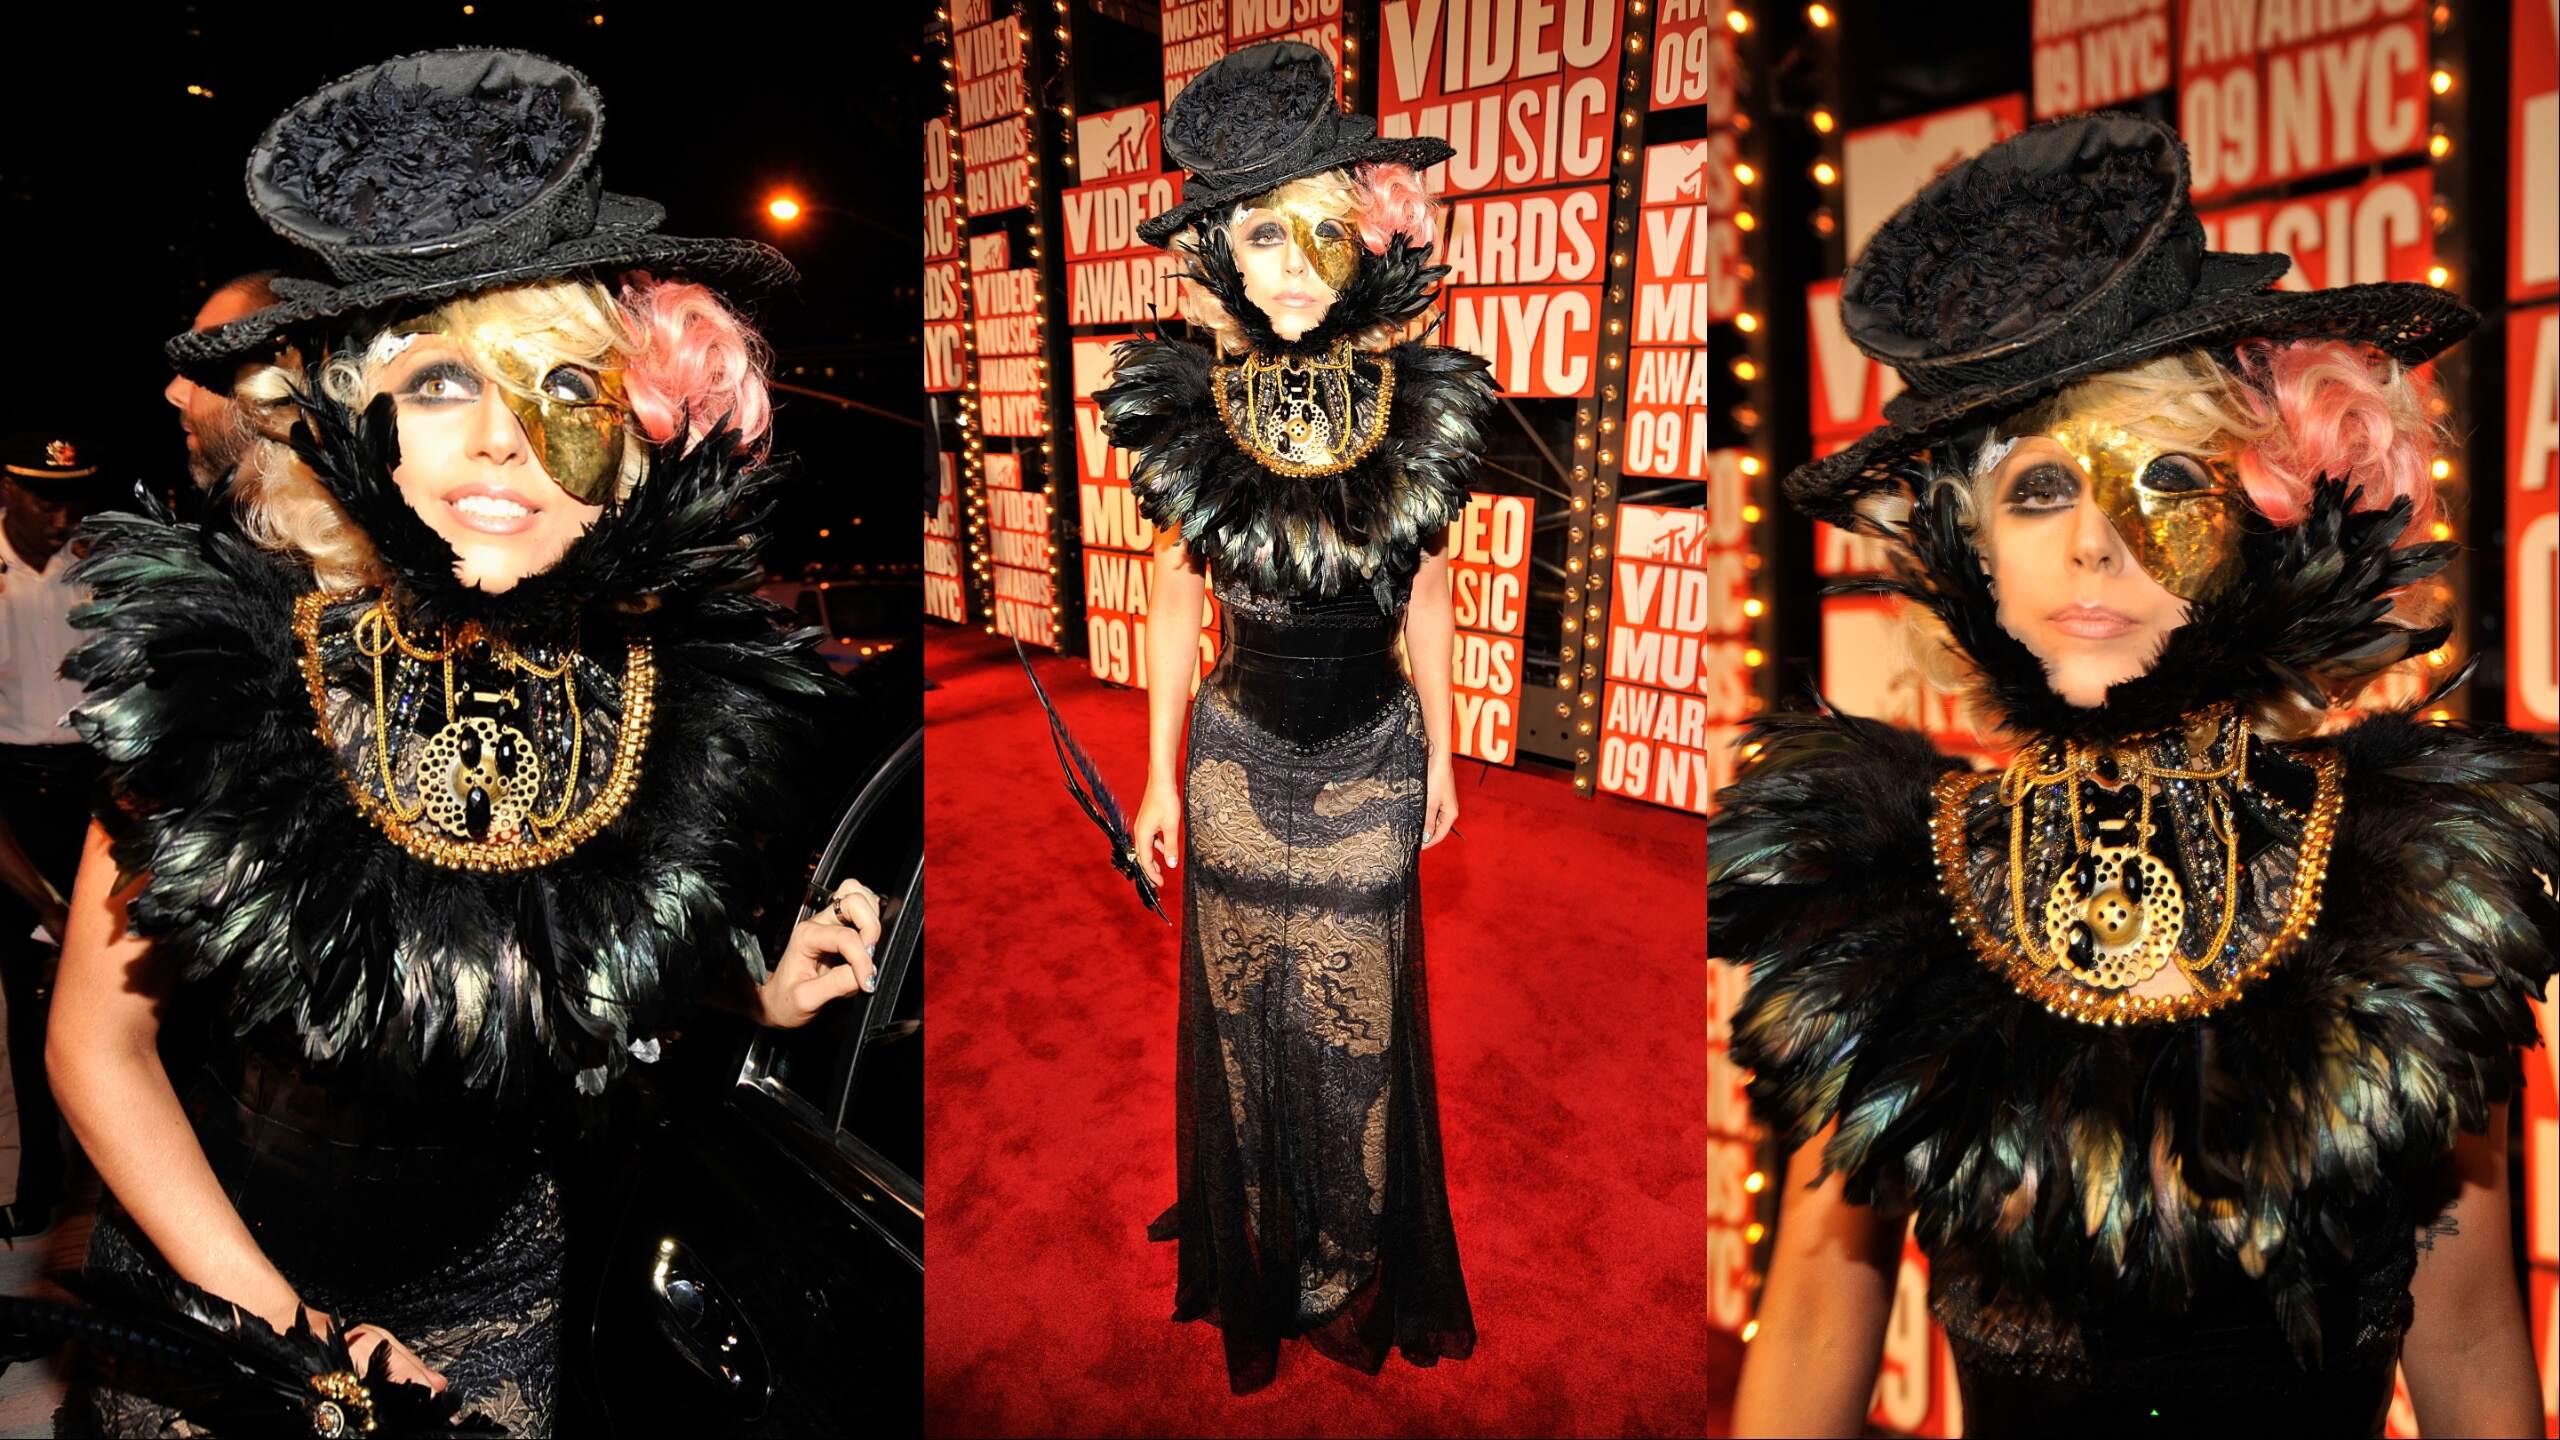 Singer Lady Gaga attends the 2009 MTV Video Music Awards wearing a black steampunk outfit